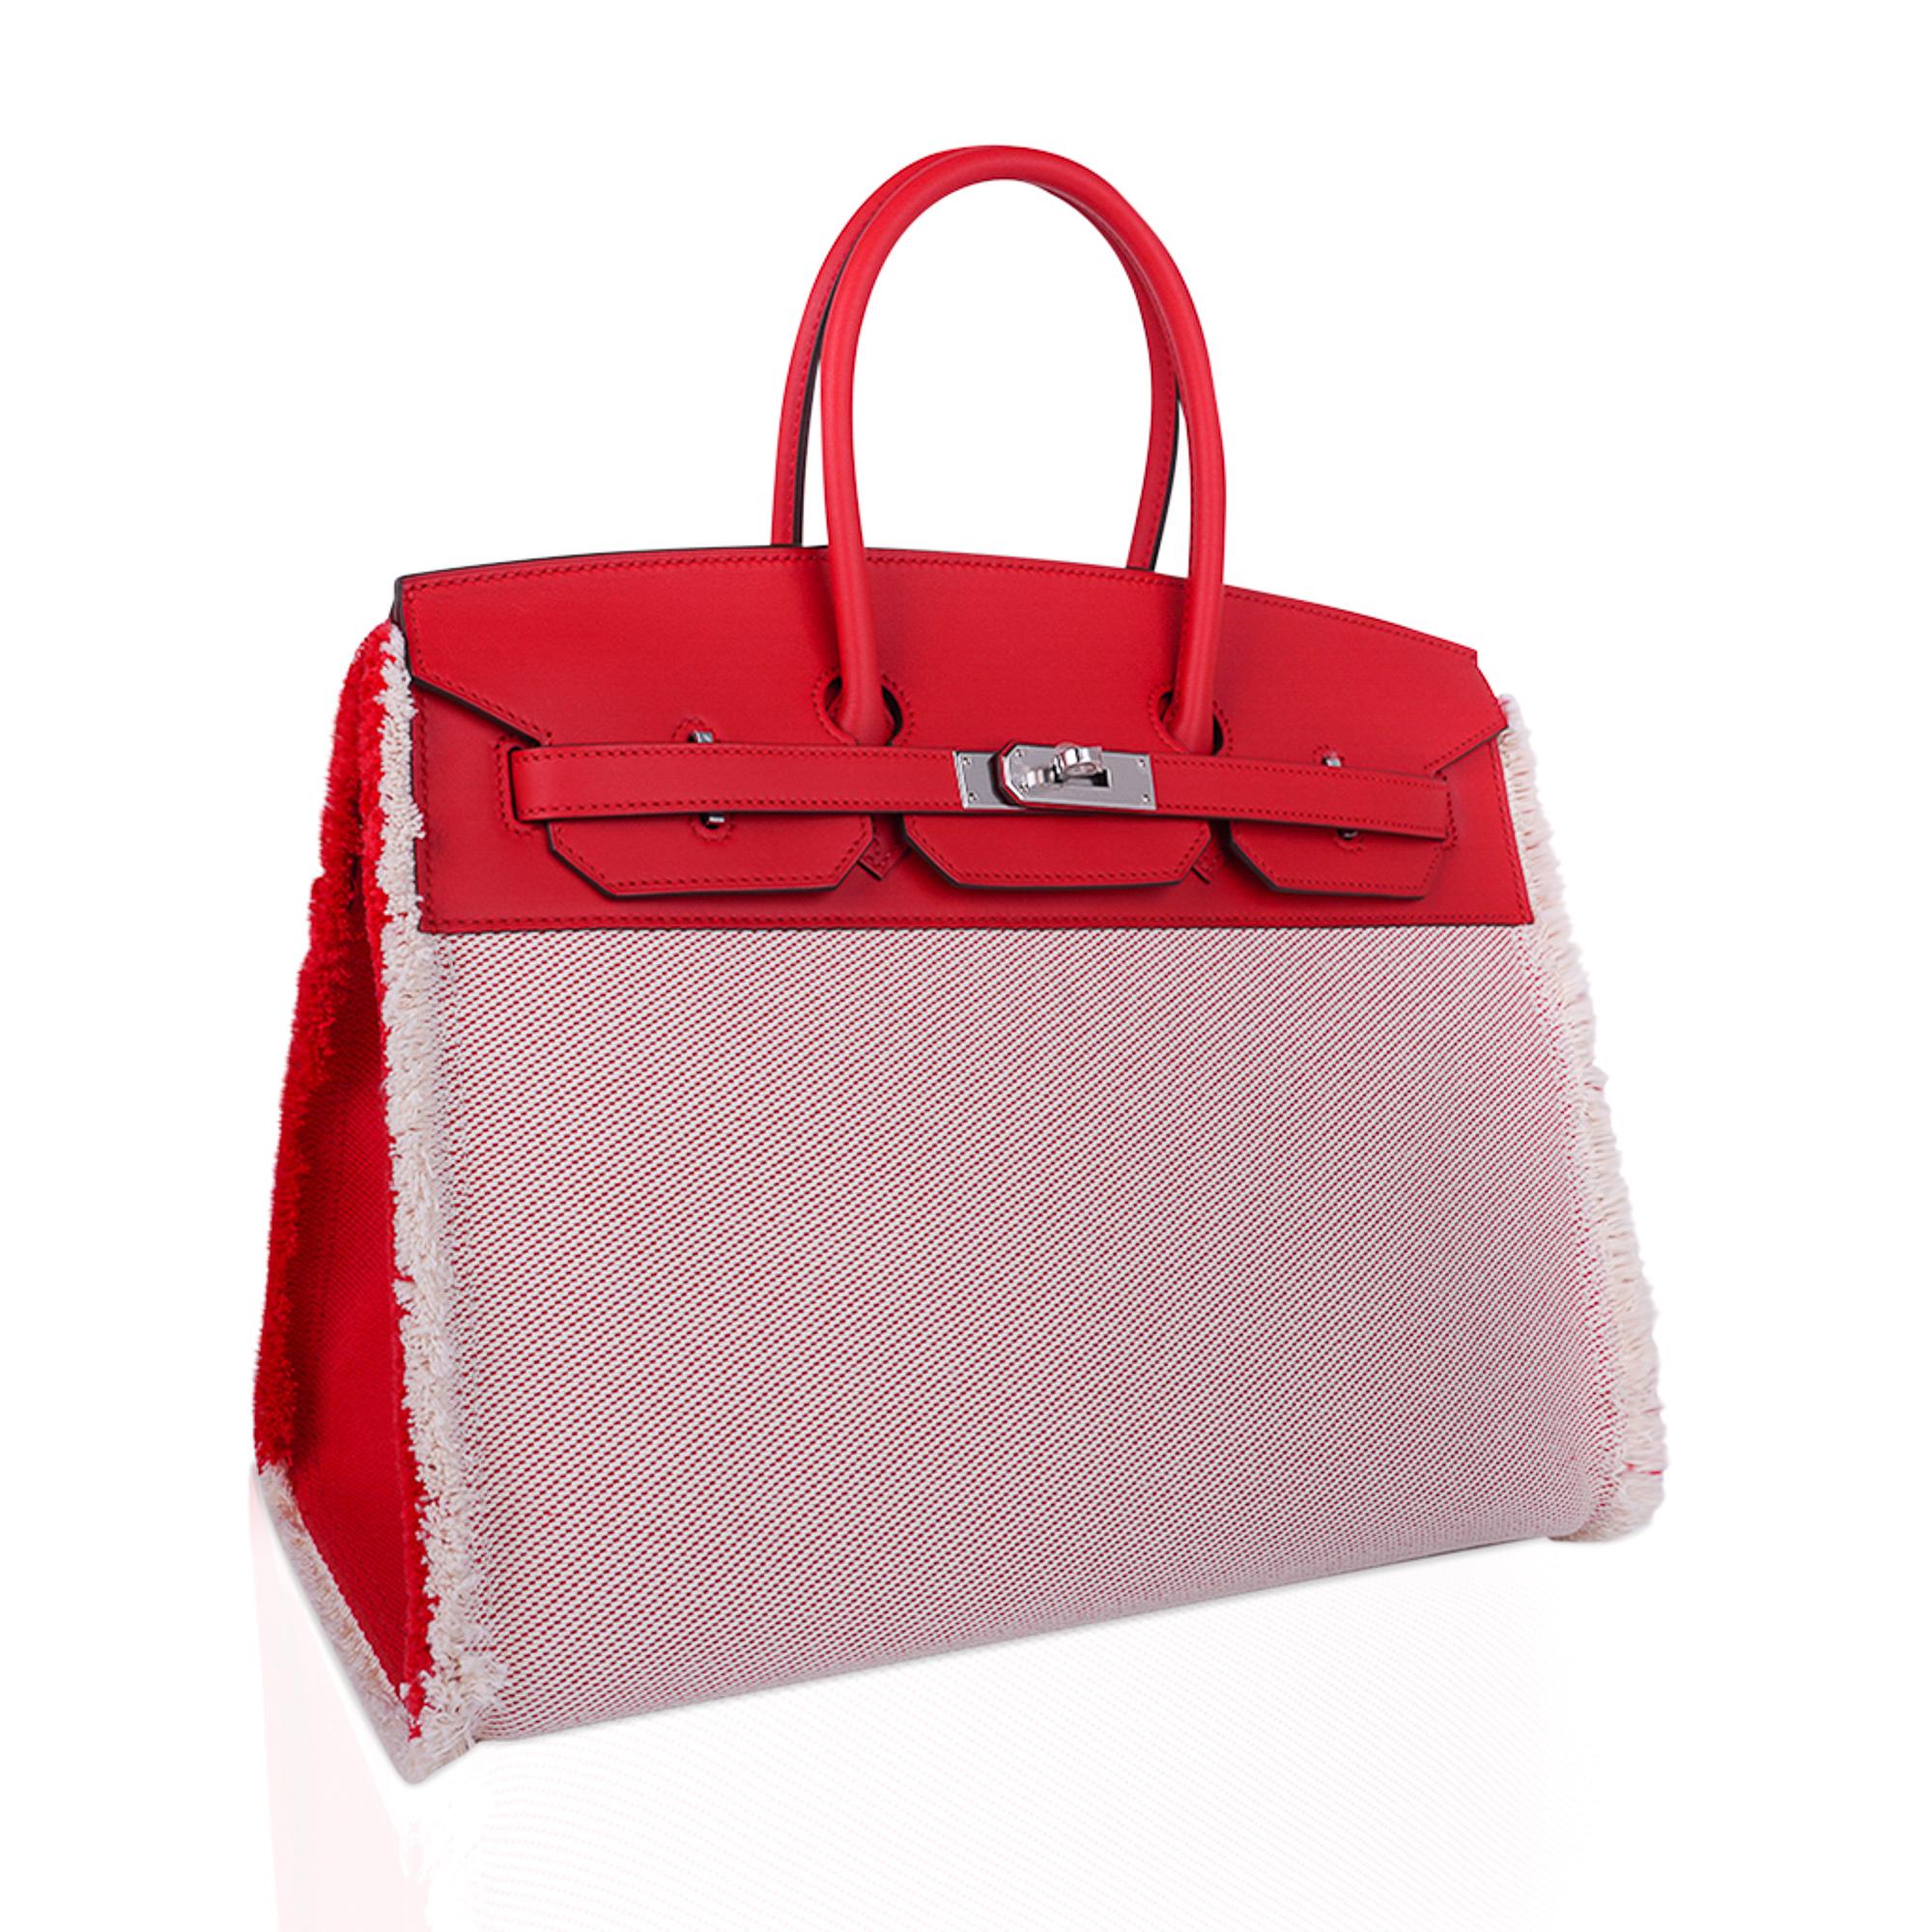 Mightychic offers an Hermes Birkin Fray Fray 35 Limited Edition bag featured in stunning Framboise.
Ecru and Framboise toile with frayed (fringe) edging.
The sides are Framboise toile.
Framboise Swift leather is crisp with the palladium